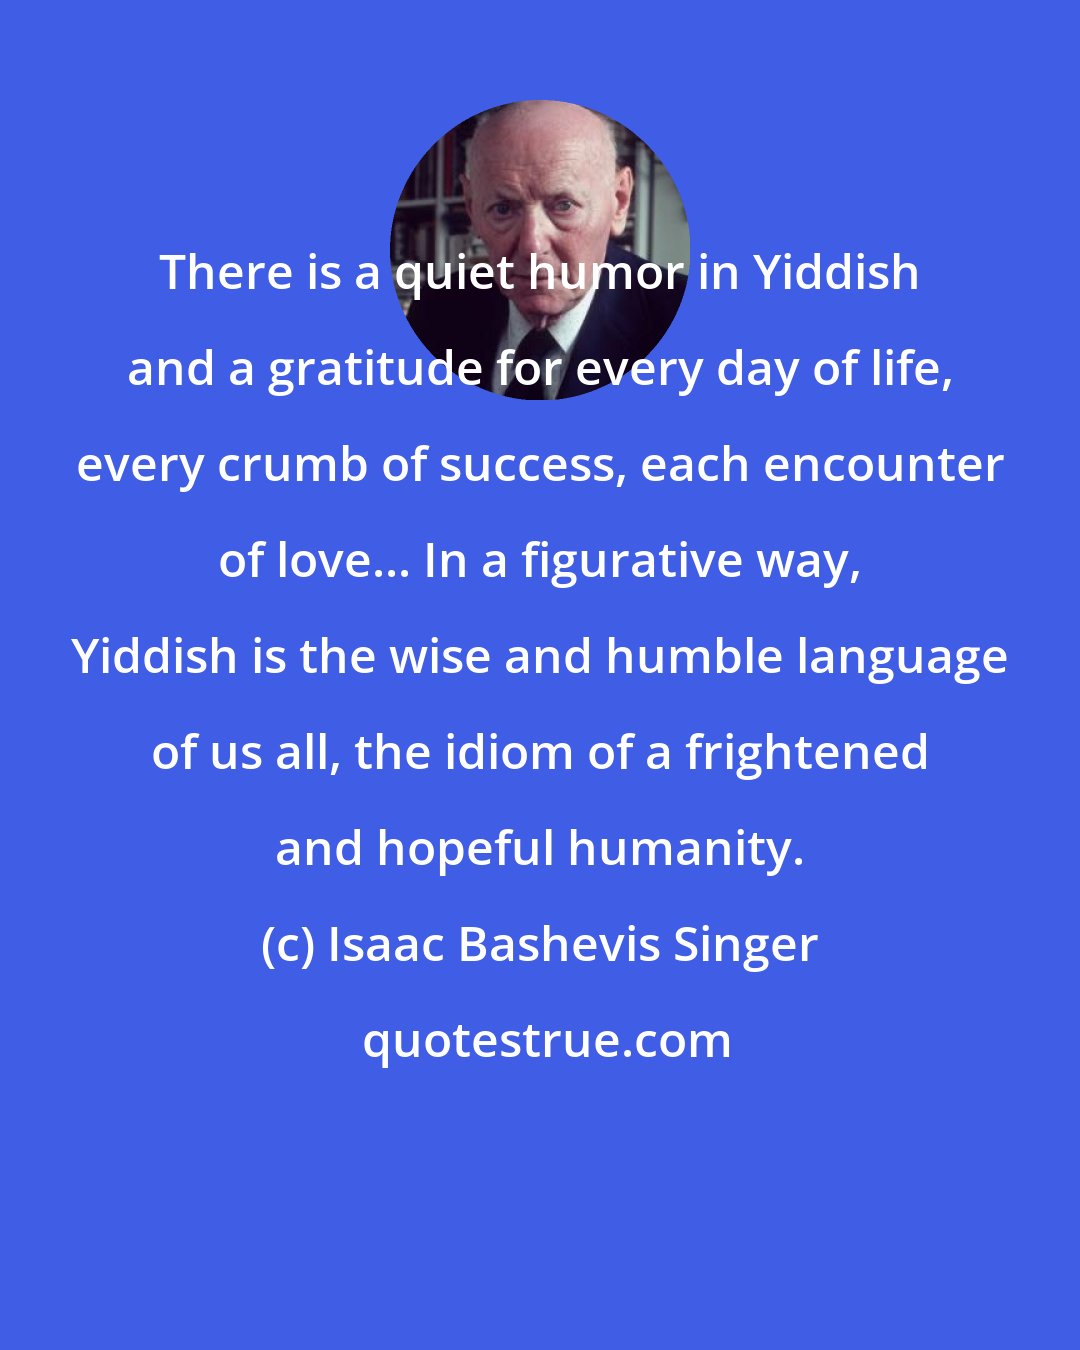 Isaac Bashevis Singer: There is a quiet humor in Yiddish and a gratitude for every day of life, every crumb of success, each encounter of love... In a figurative way, Yiddish is the wise and humble language of us all, the idiom of a frightened and hopeful humanity.